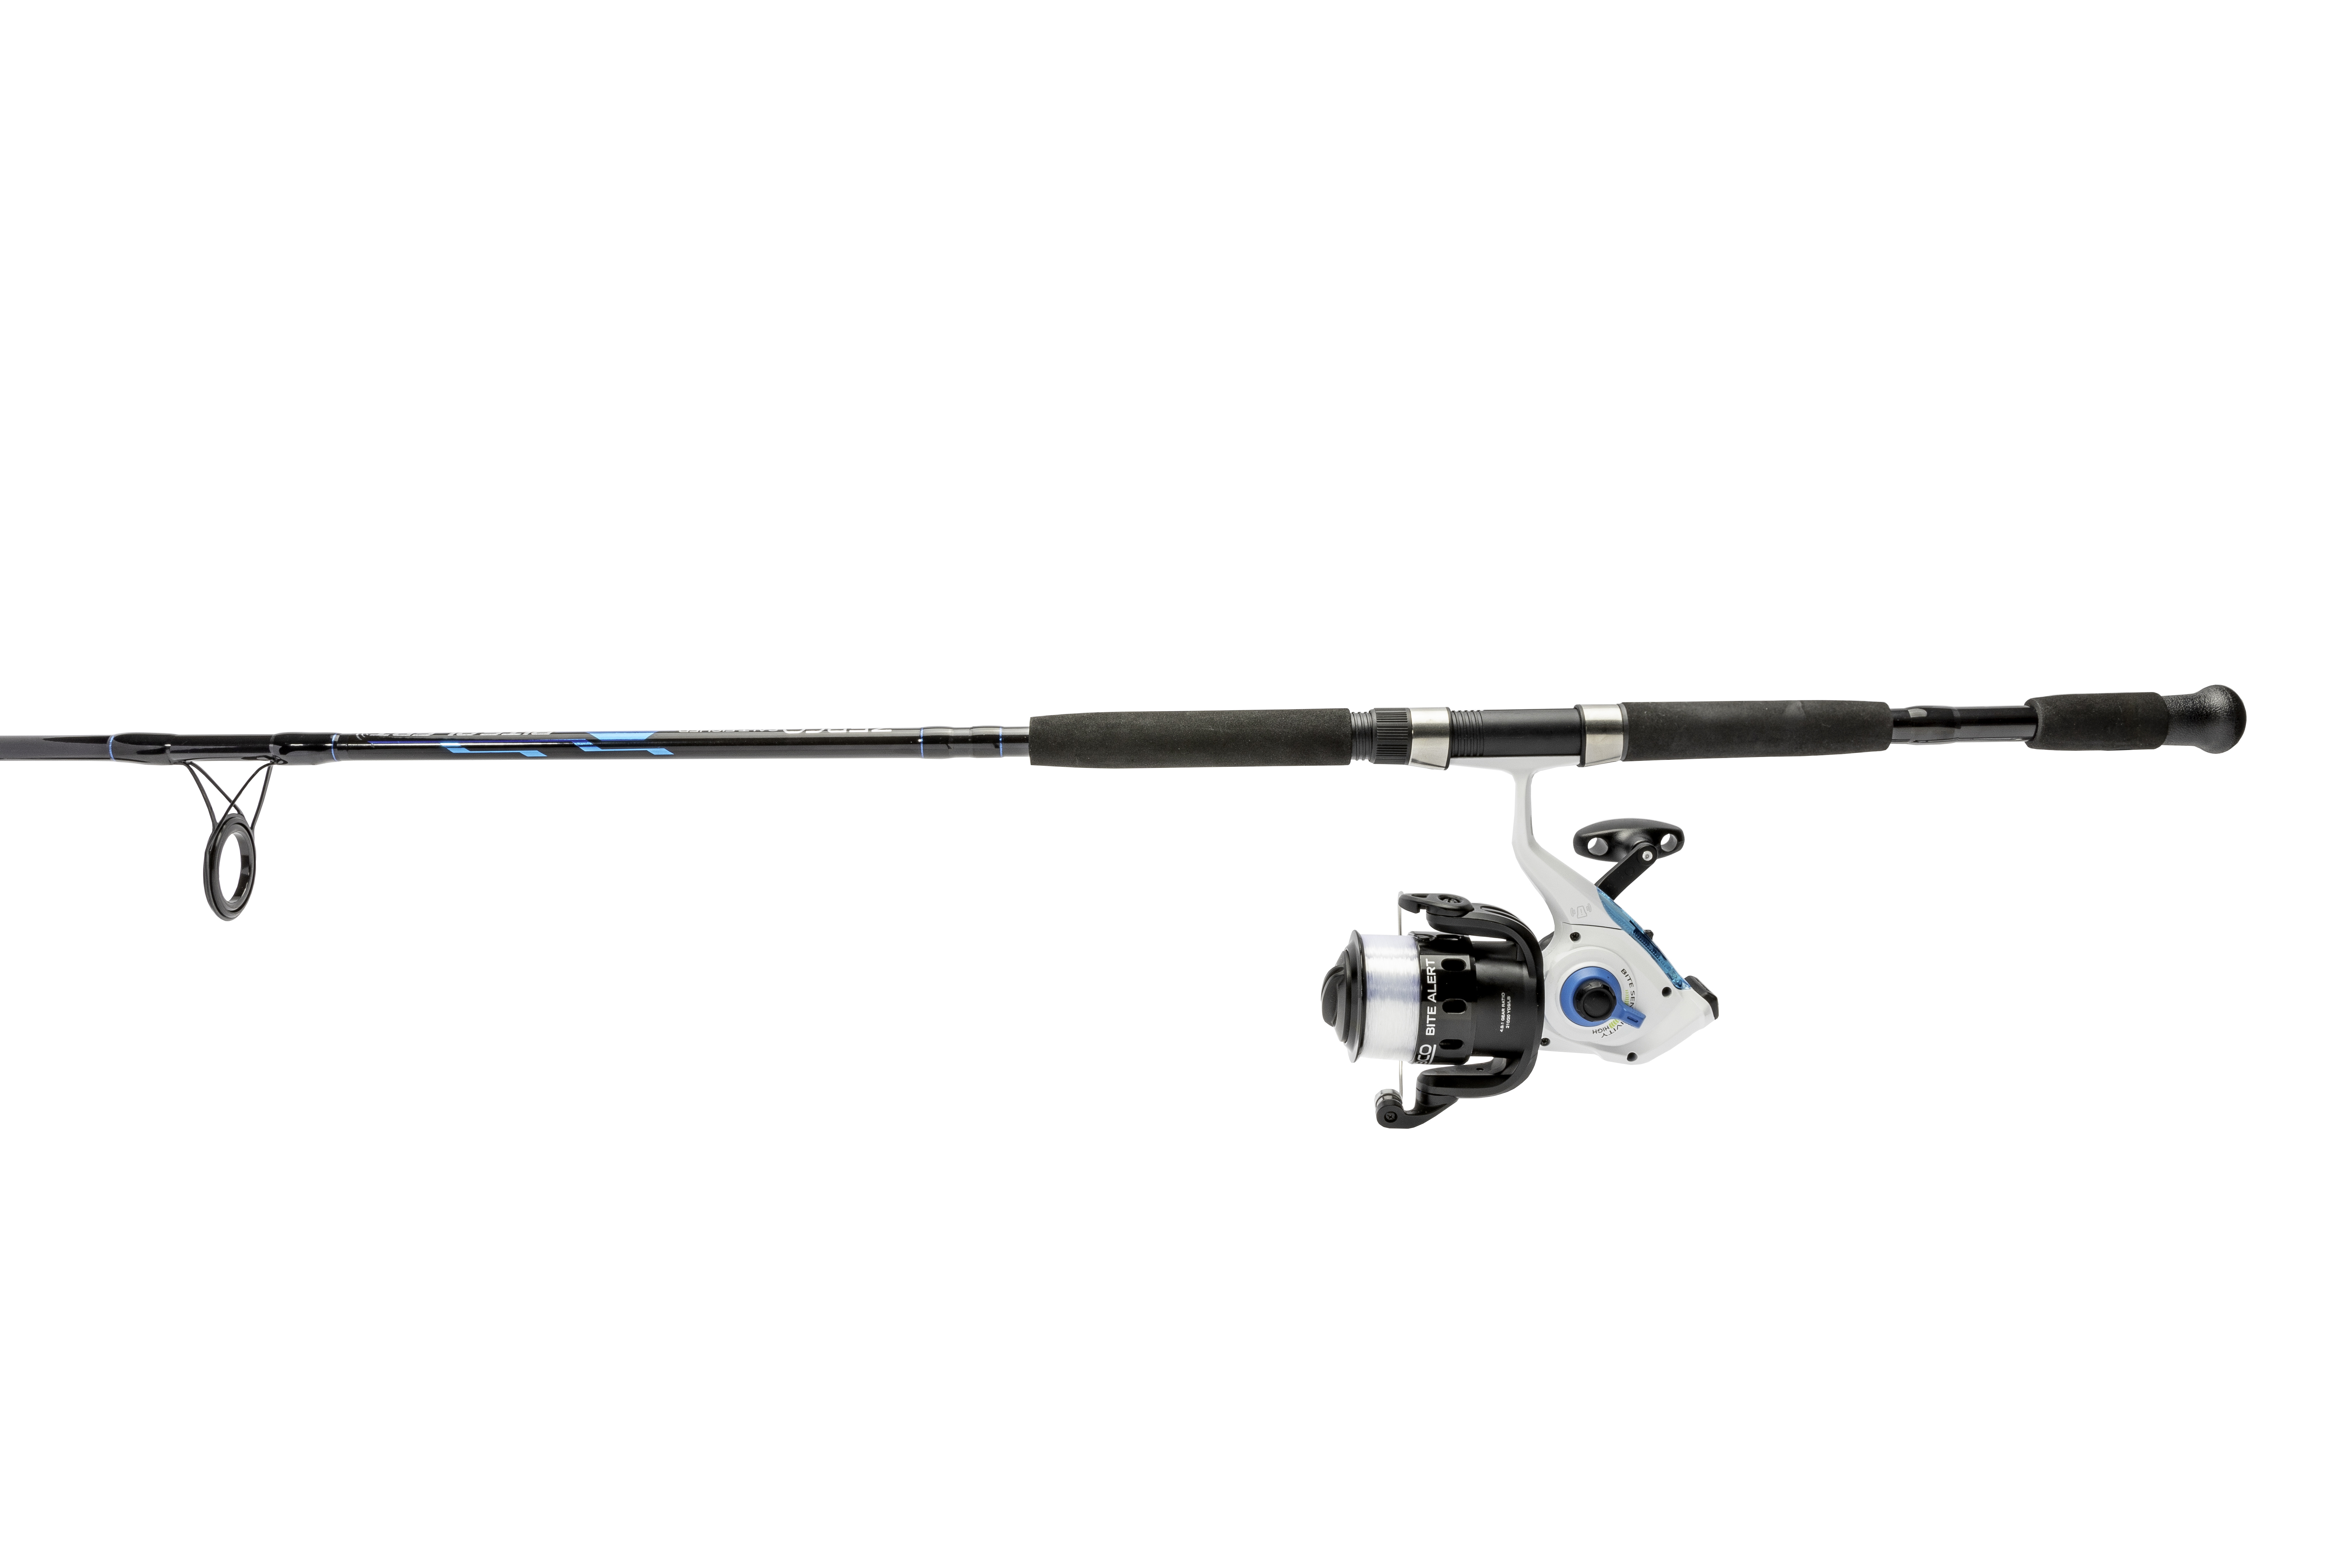  Zebco Big Cat Spincast Reel And Fishing Rod Combo, 7-Foot 2-Piece  Fishing Pole, Dial-Adjustable Magnum Drag, Pre-Spooled